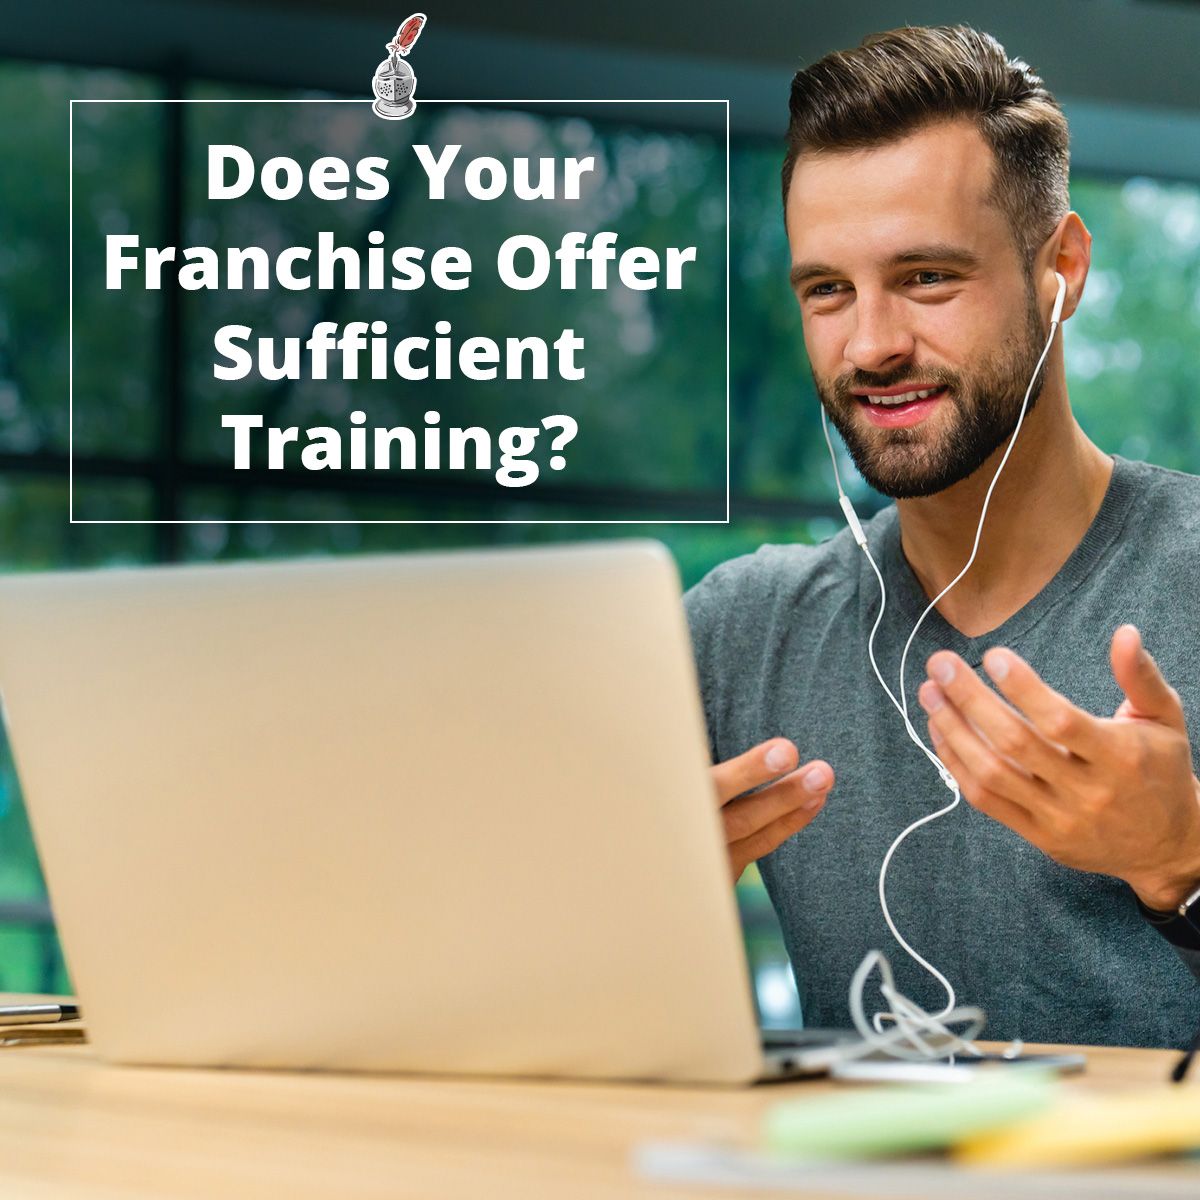 Does Your Franchise Offer Sufficient Training?